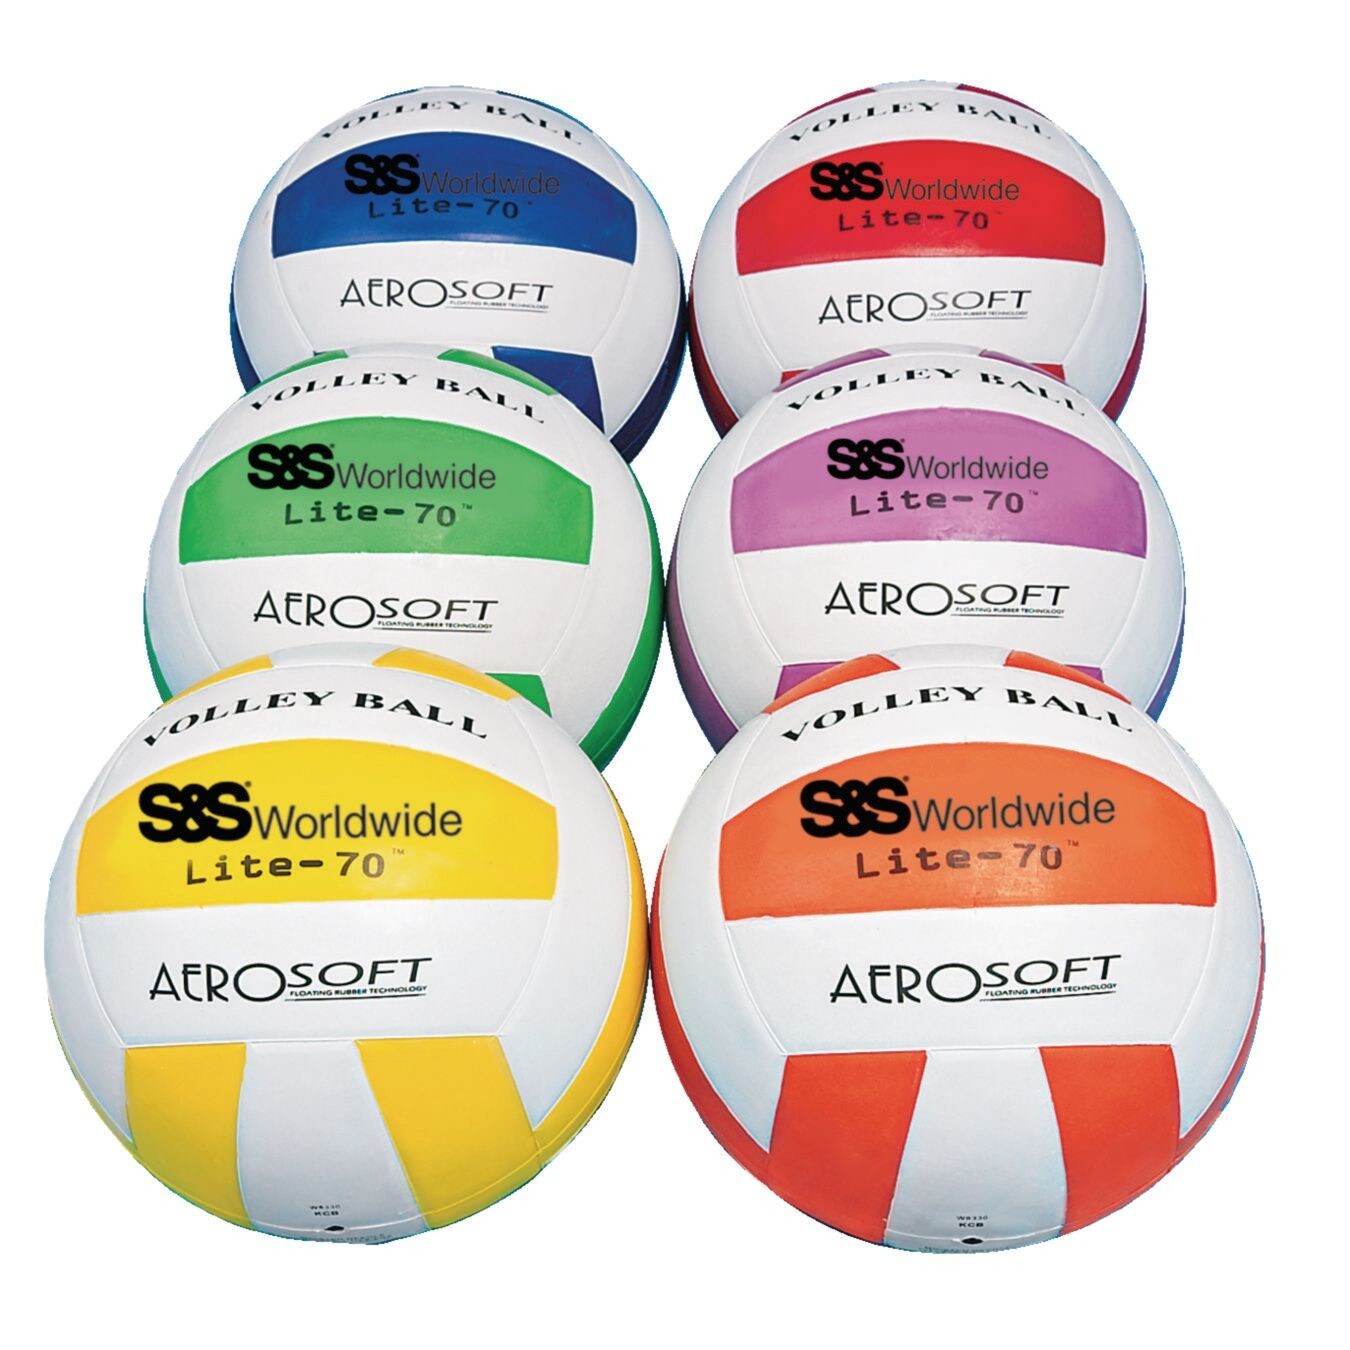 S&#x26;S Worldwide Lite 70 Inflatable Foamed Rubber Volleyballs. Official Sized Balls are 30% Lighter than Standard Volleyball. Great for Kids, Novice Players and Recreational Play. Set of 6 Balls.